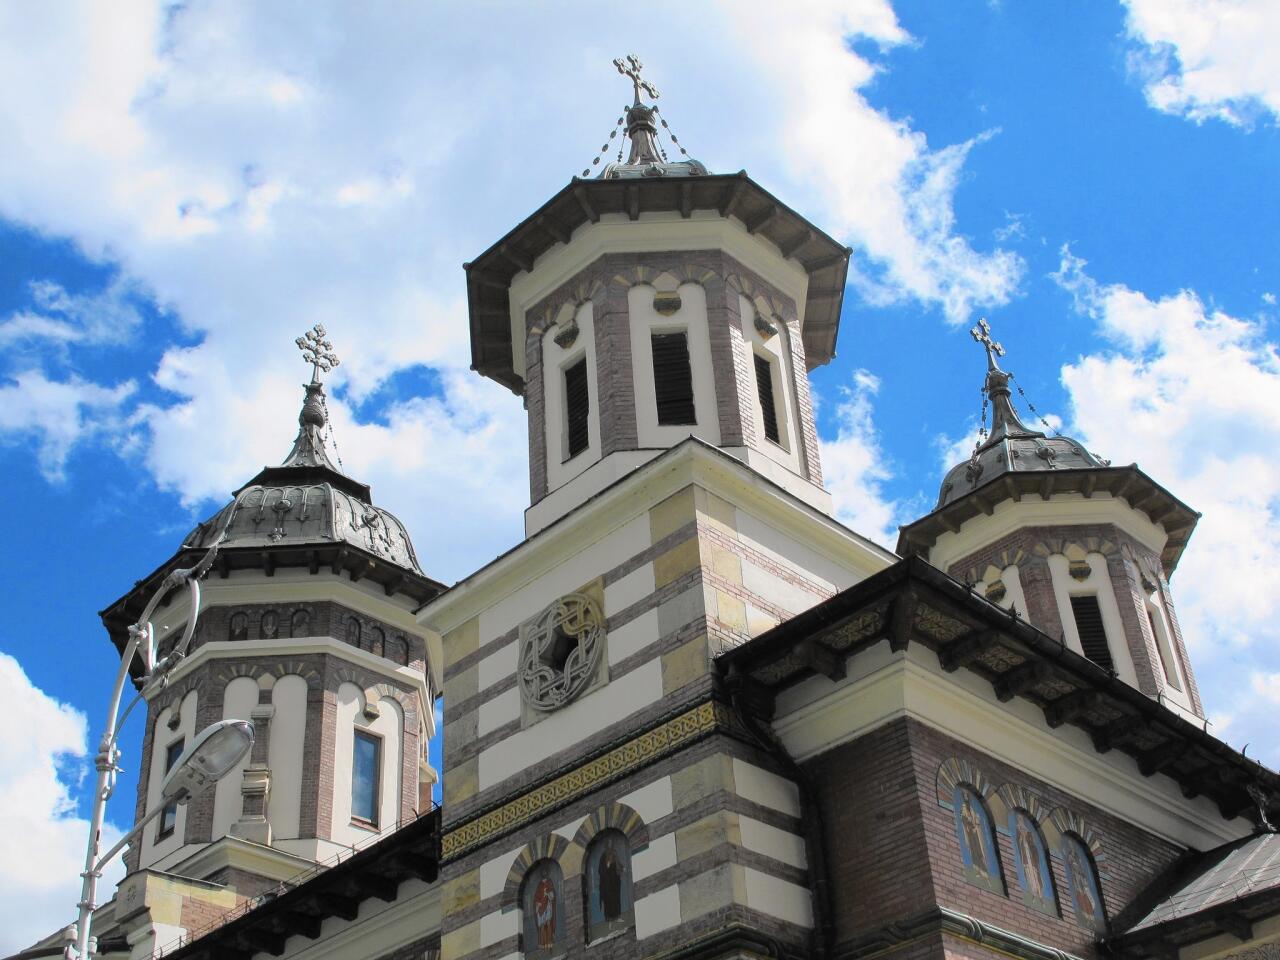 The Great Church of the Monastery of Sinaia is a landmark on the mountain road to Transylvania from Bucharest, the Romanian capital. Though Romanians are ethnically Latin, the Orthodox faith is the dominant religion.